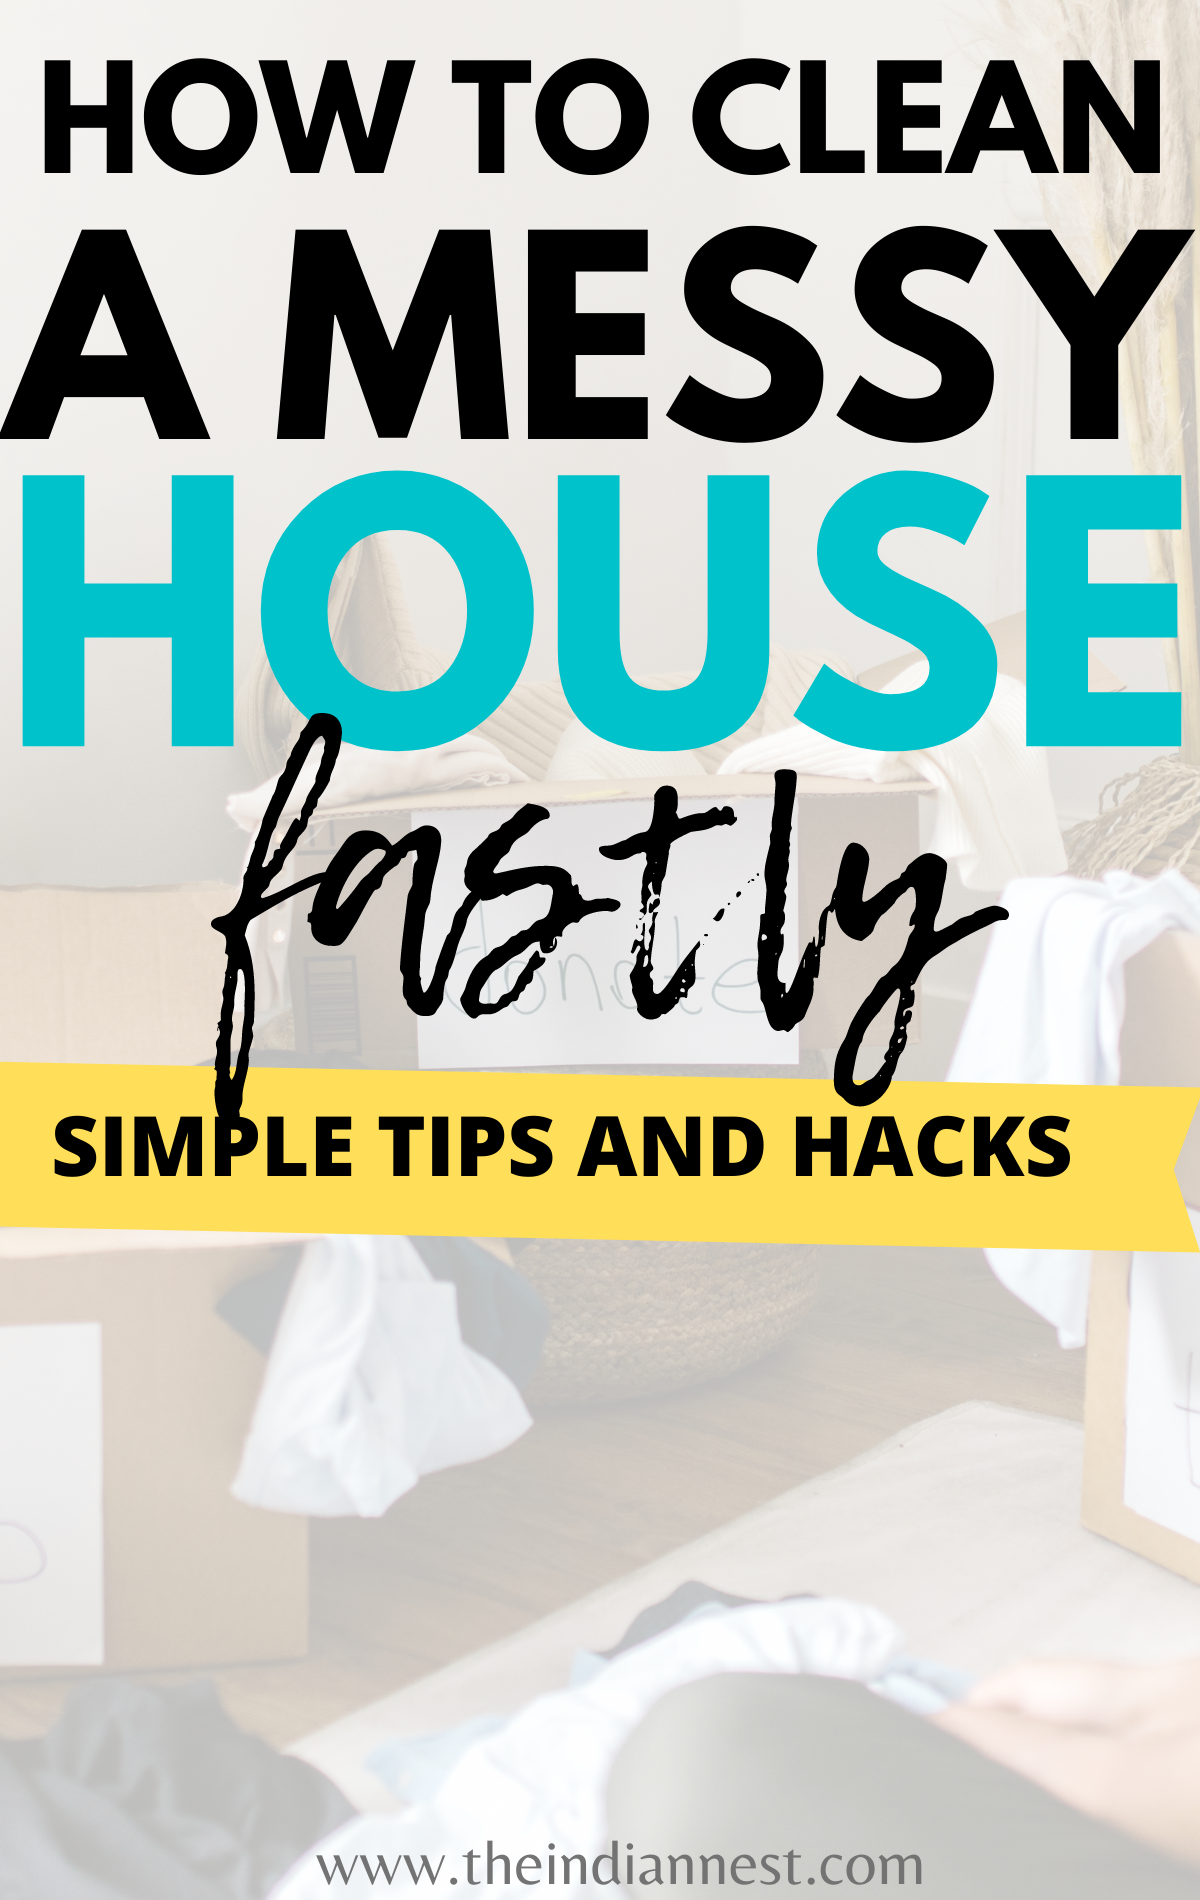 How can you clean house without being overwhelmed?  How to Quickly Clean a Messy House. How to Clean a Messy House - A Step by Step Guide! Tips on How to Clean a Messy House Fast